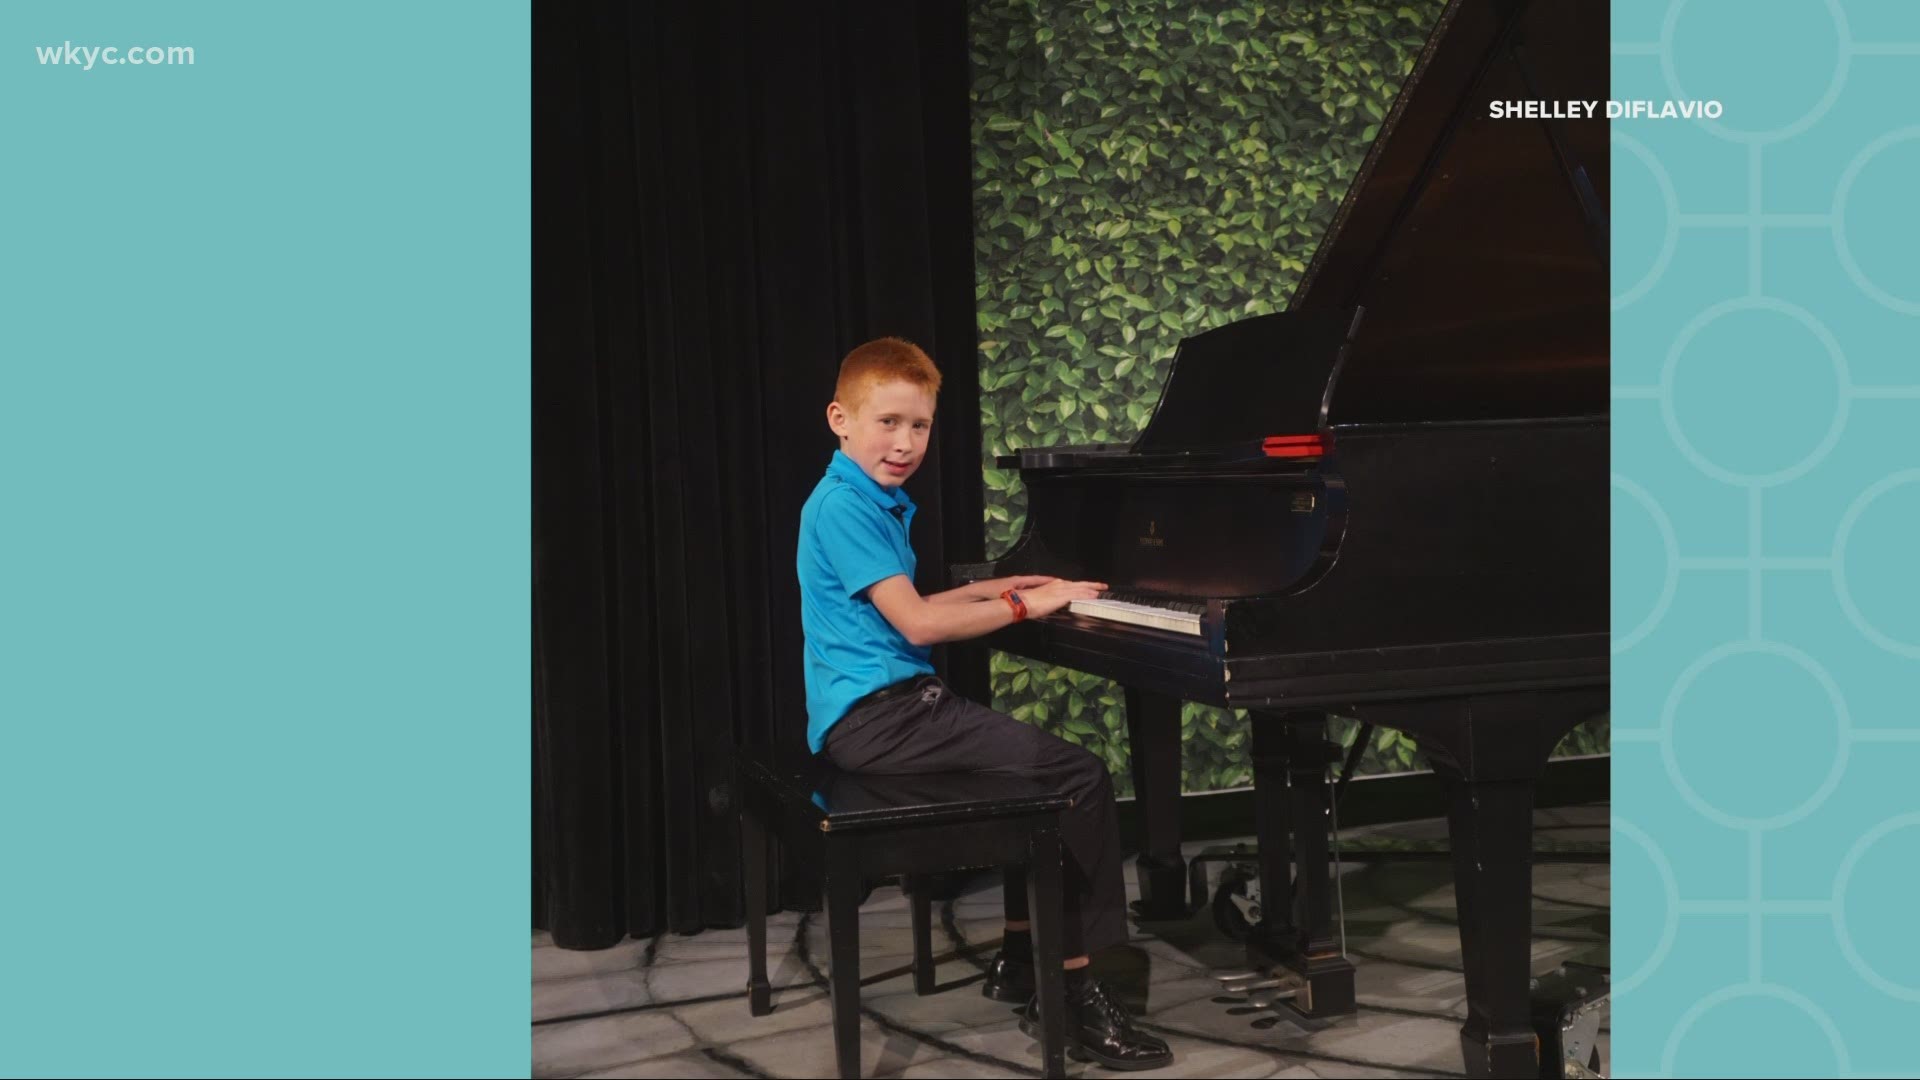 We're all feeling the blues from COVID-19. But in a contest for his school, one local boy shared his feelings through music.